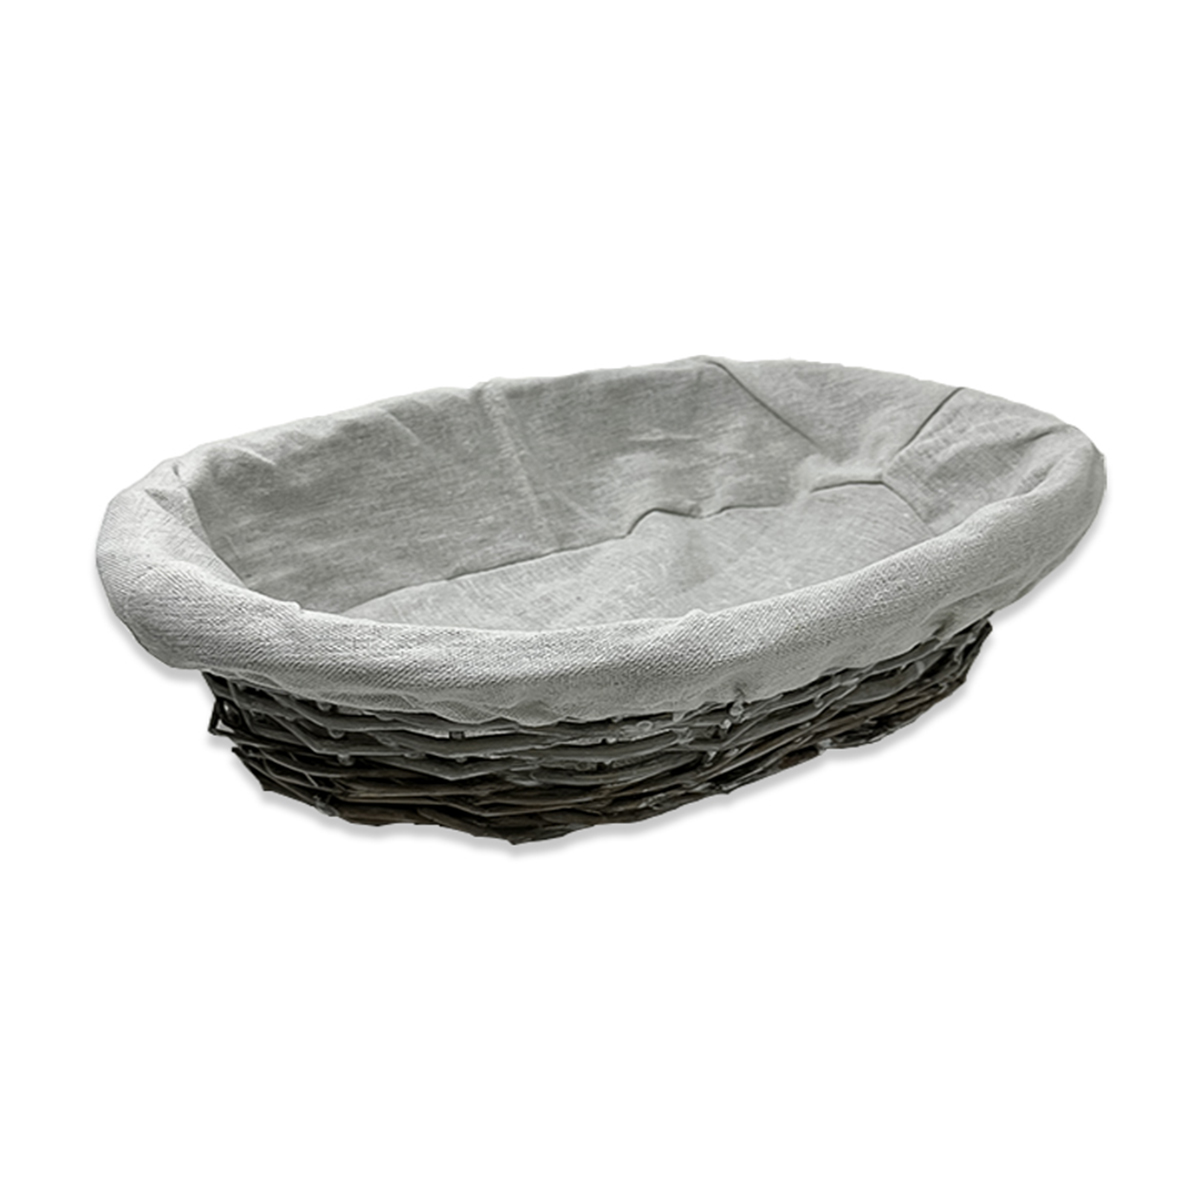 Savannah Large Oval Utility with Cloth Liner 12in - Antique Gray